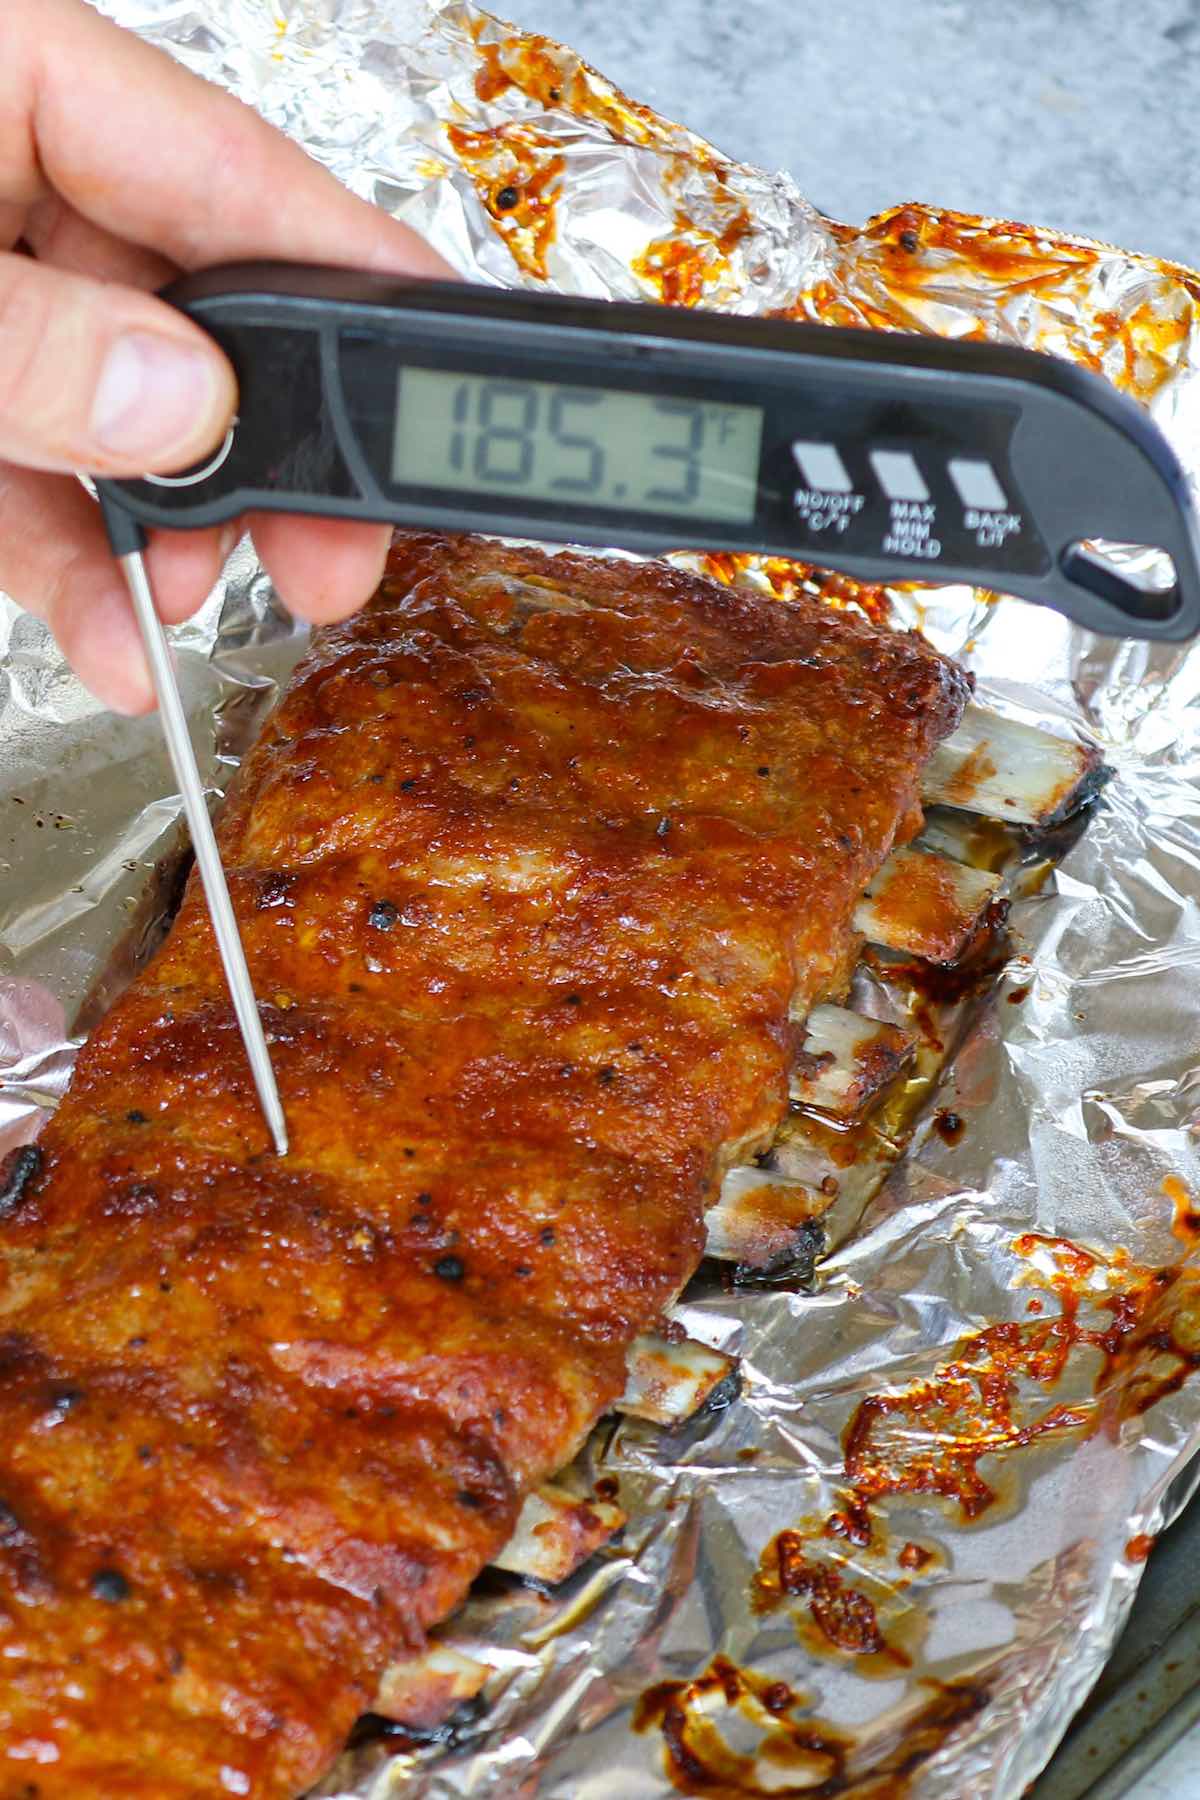 Checking doneness of ribs using an instant read thermometer